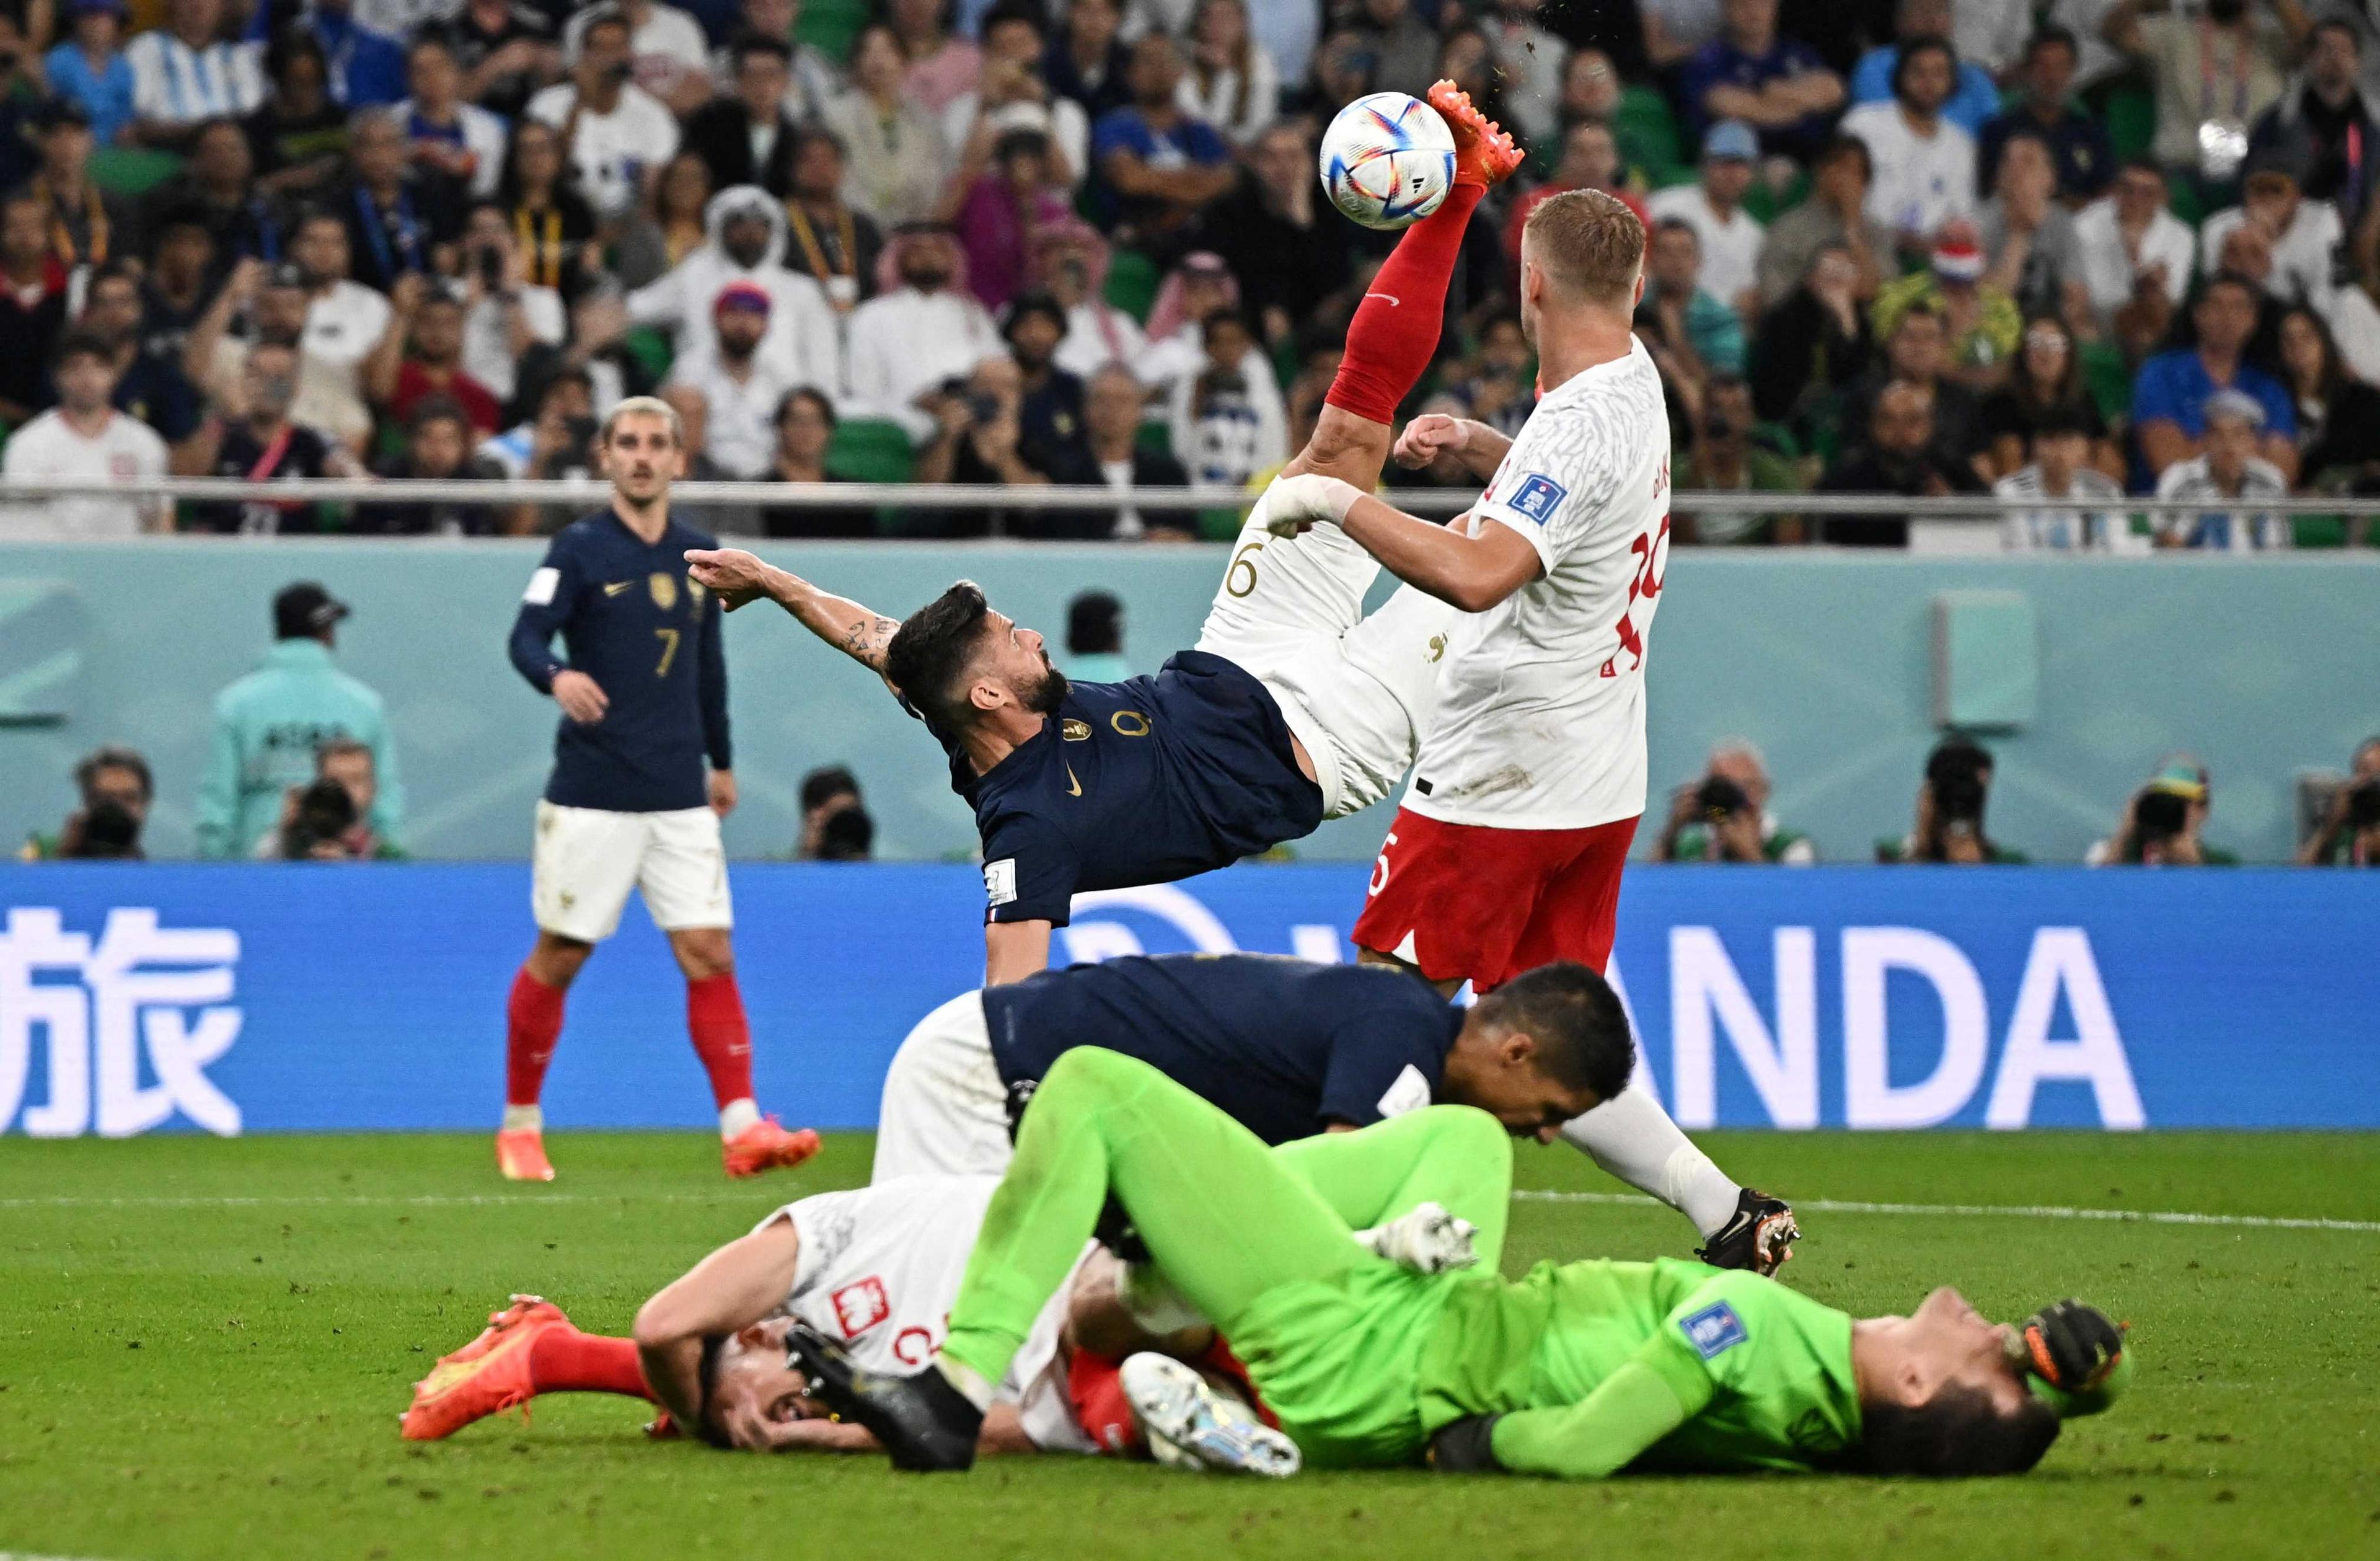 France's Olivier Giroud scores a disallowed goal as Poland's Wojciech Szczesny reacts after sustaining an injury at Al Thumama Stadium in Doha, Qatar, Dec 4. Photo: Reuters